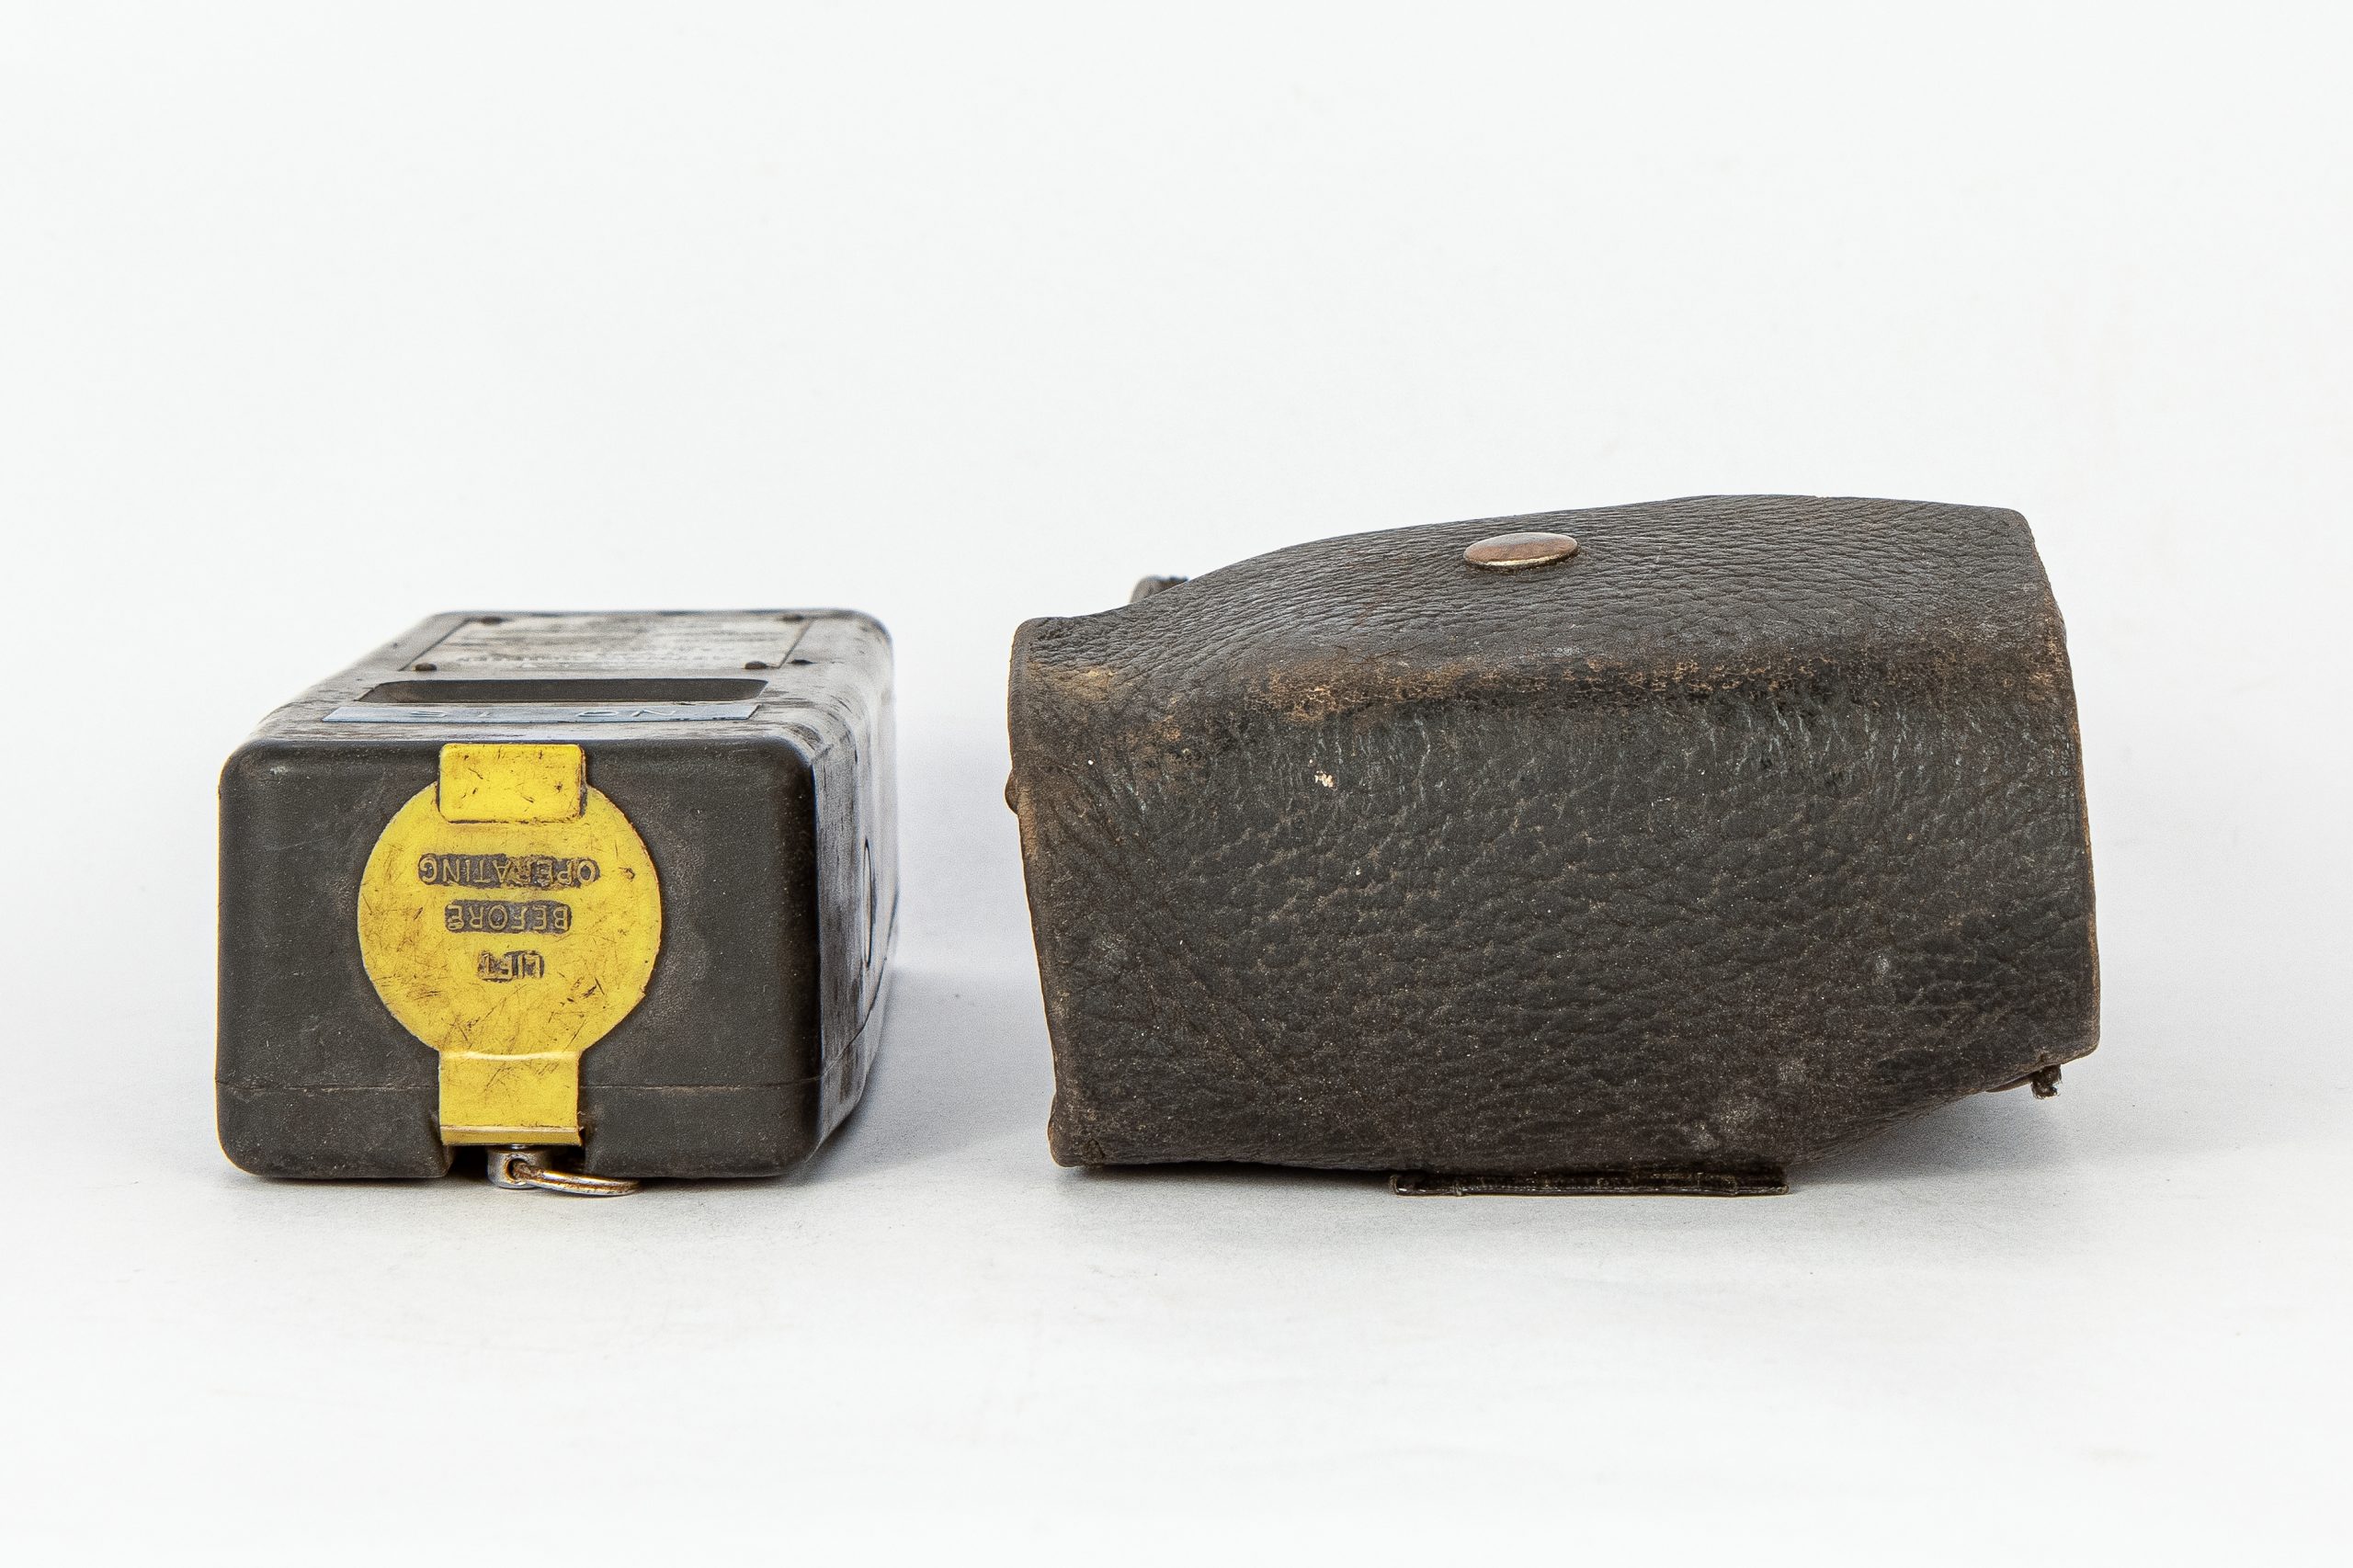 Top of device shaped like an old Nokia mobile phone. A circular, yellow panel reads, "LIFT BEFORE OPERATING." Beside it is a leather pouch to hold the device.